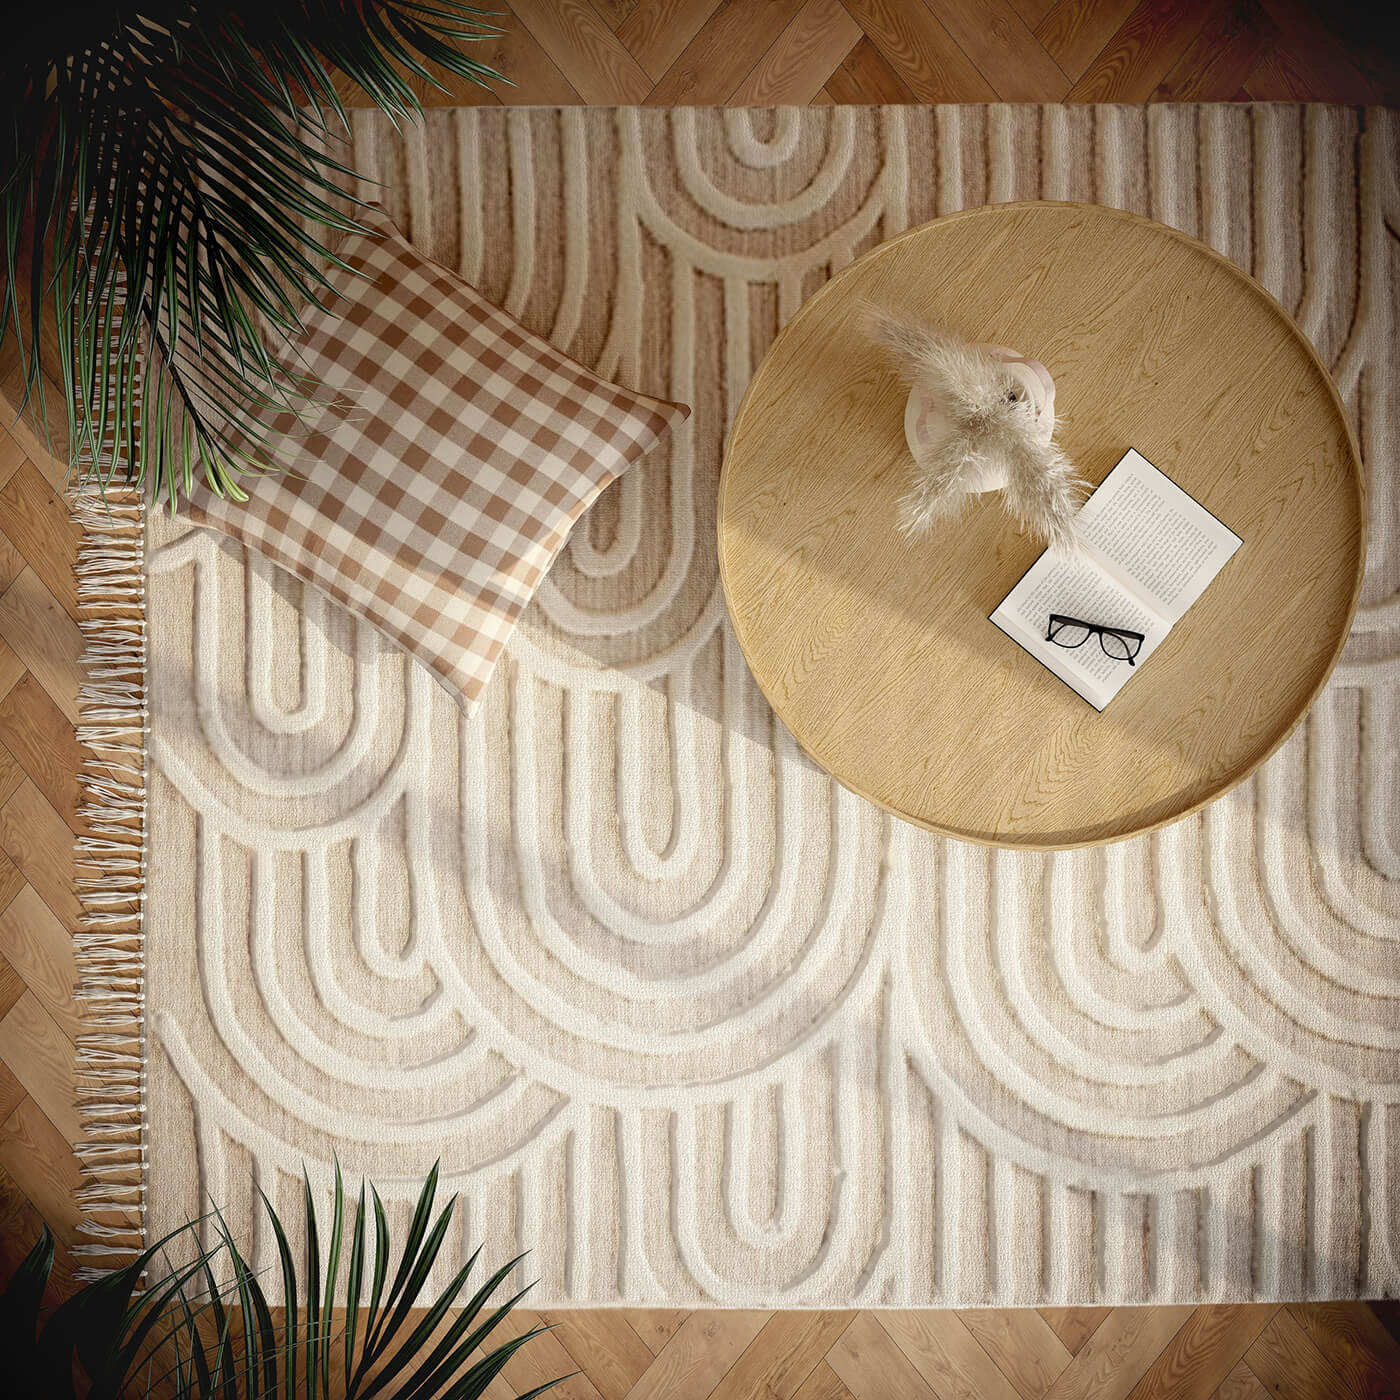 3D Visualization of a Rug with Minimalist Pattern